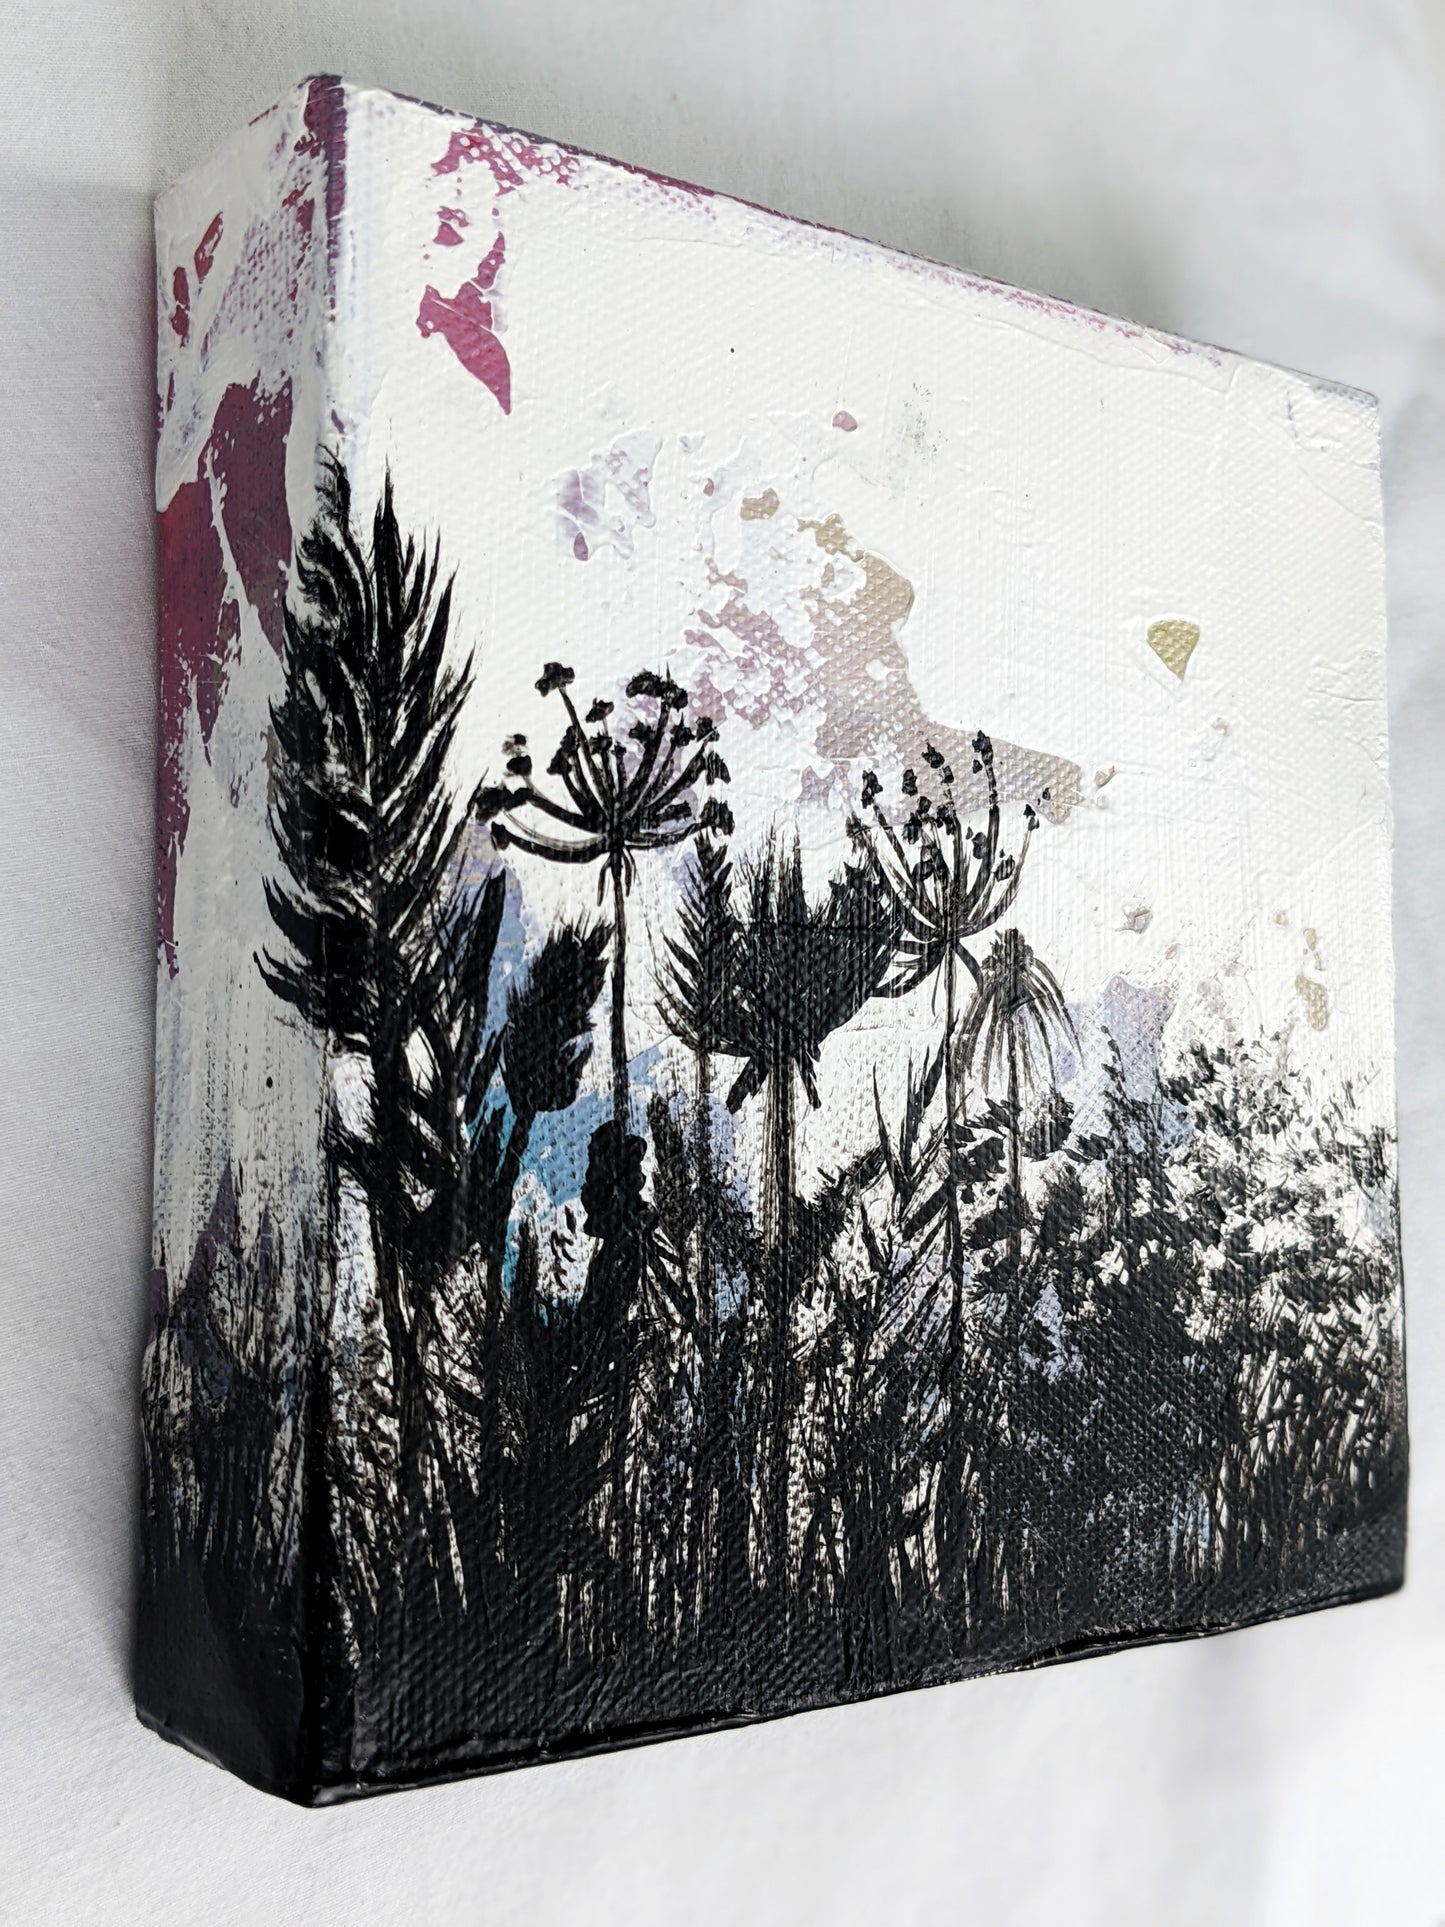 Botanical Abstract Silhouette 001  - 6" Canvas Mini